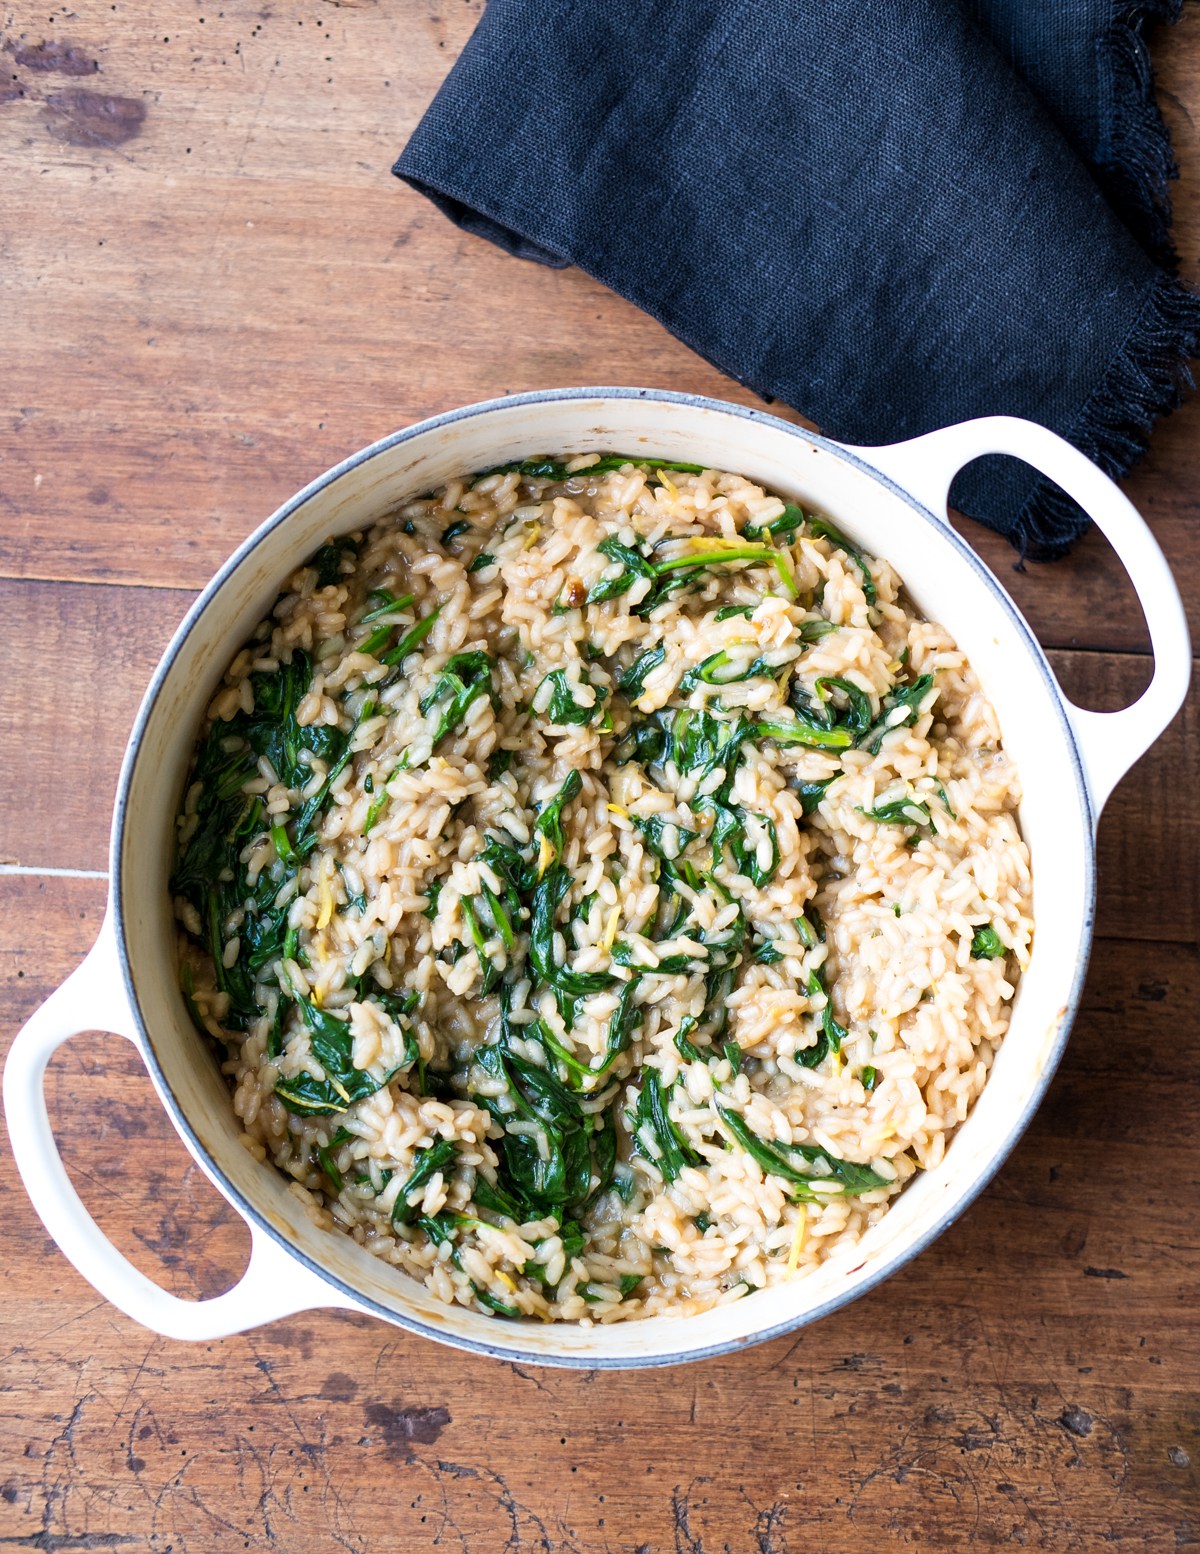 Cooked Rice with Greens in a Bowl